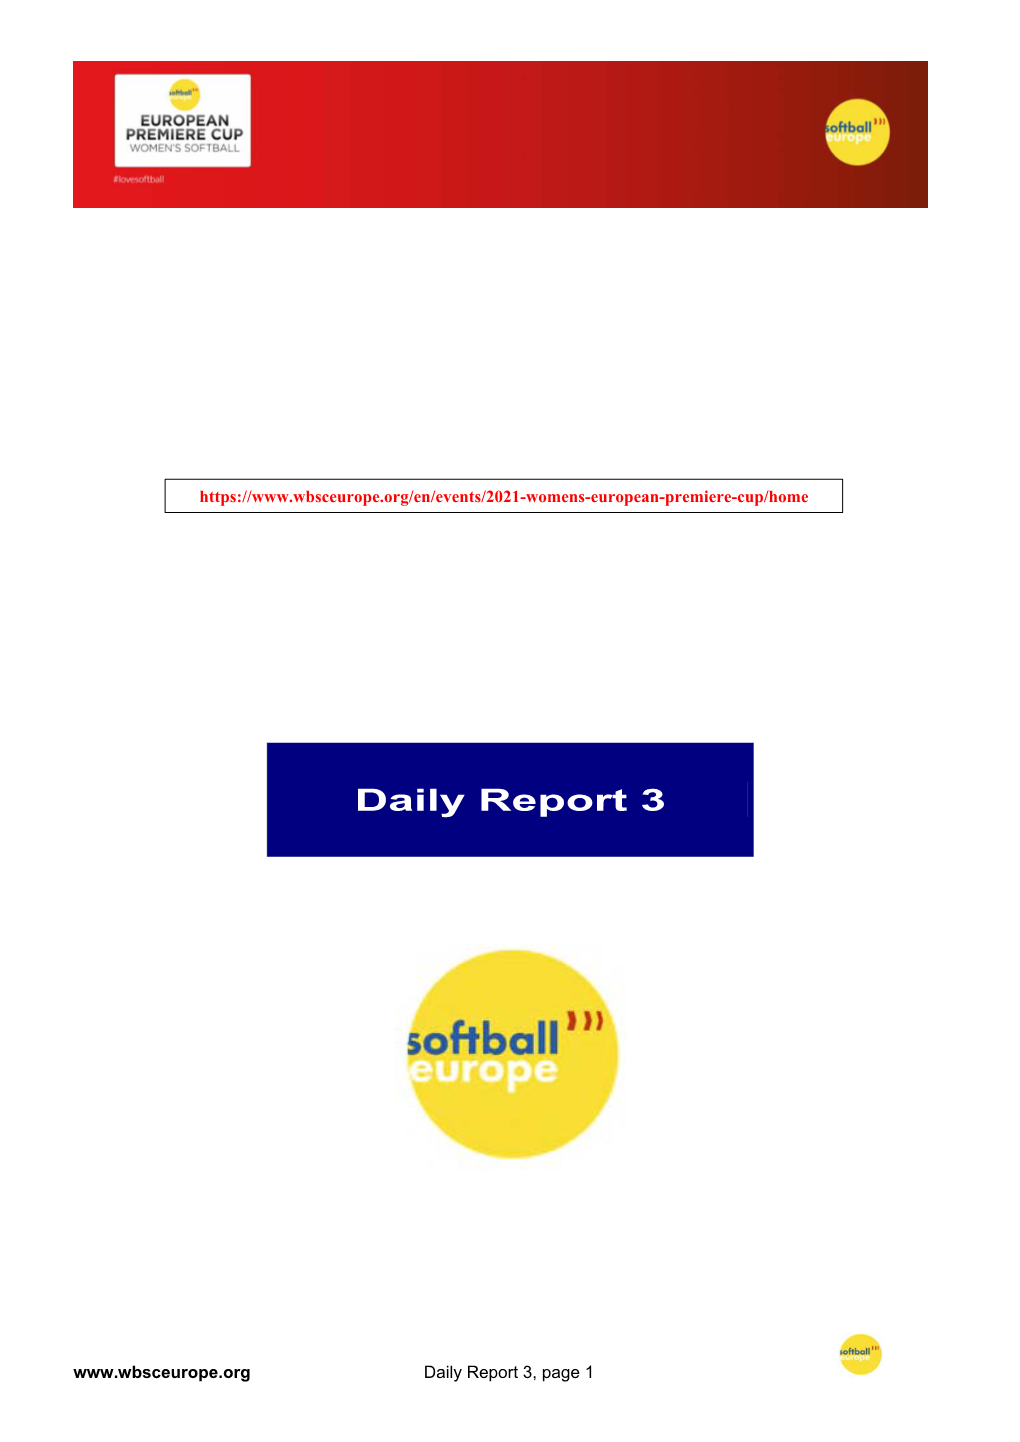 Daily Report 3